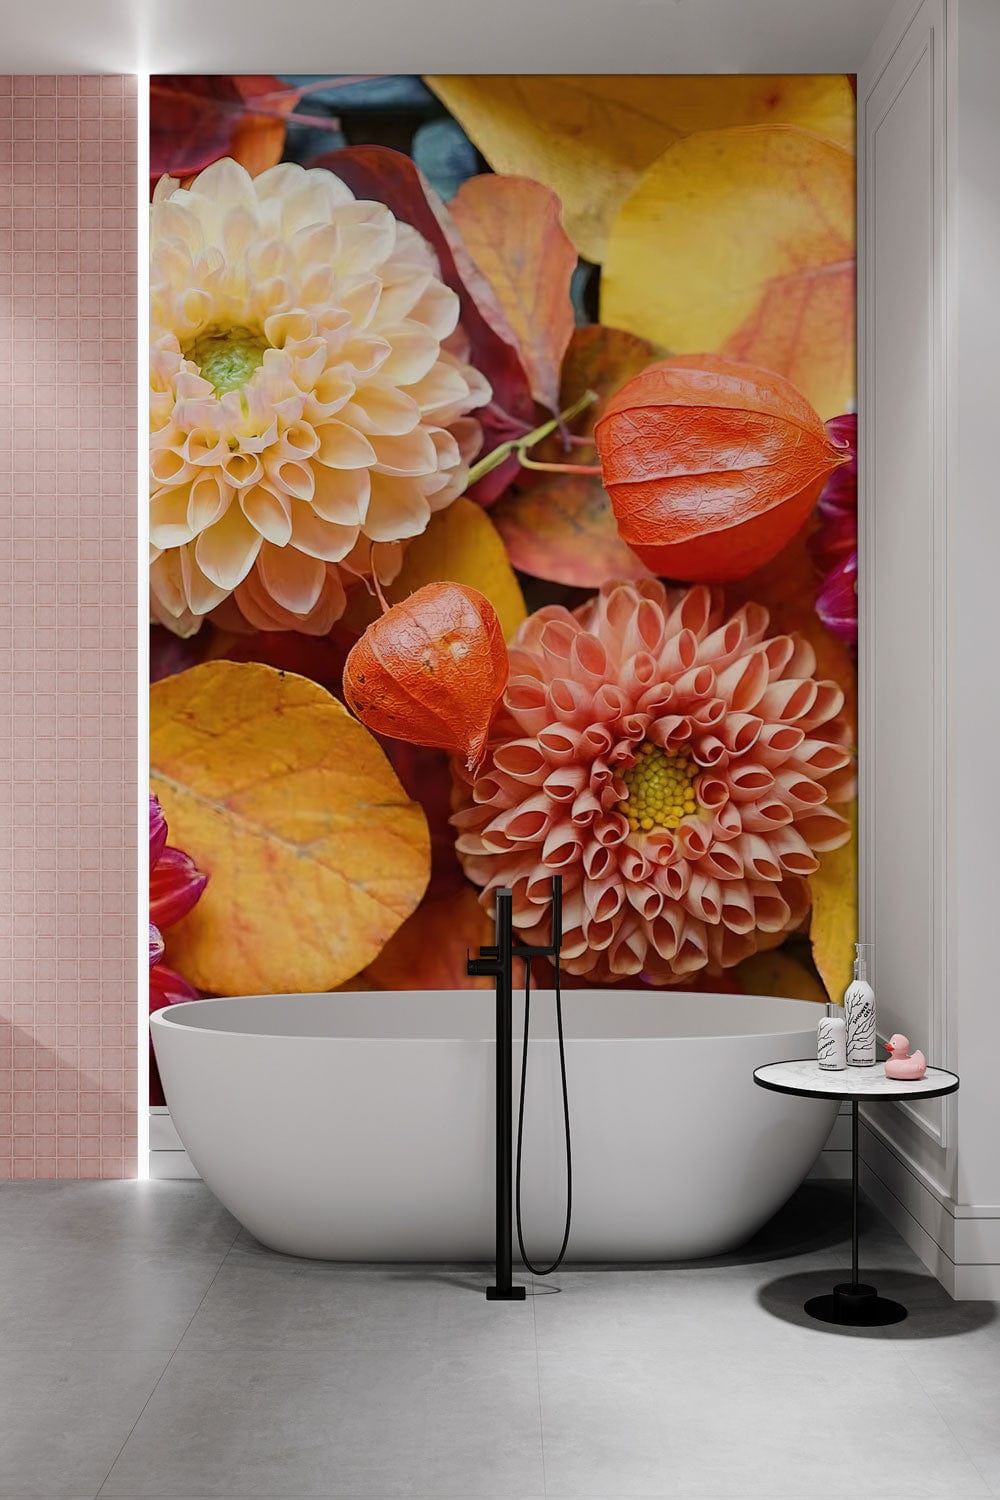 Wallpaper mural featuring colorful dahlias, perfect for use as a bathroom decoration